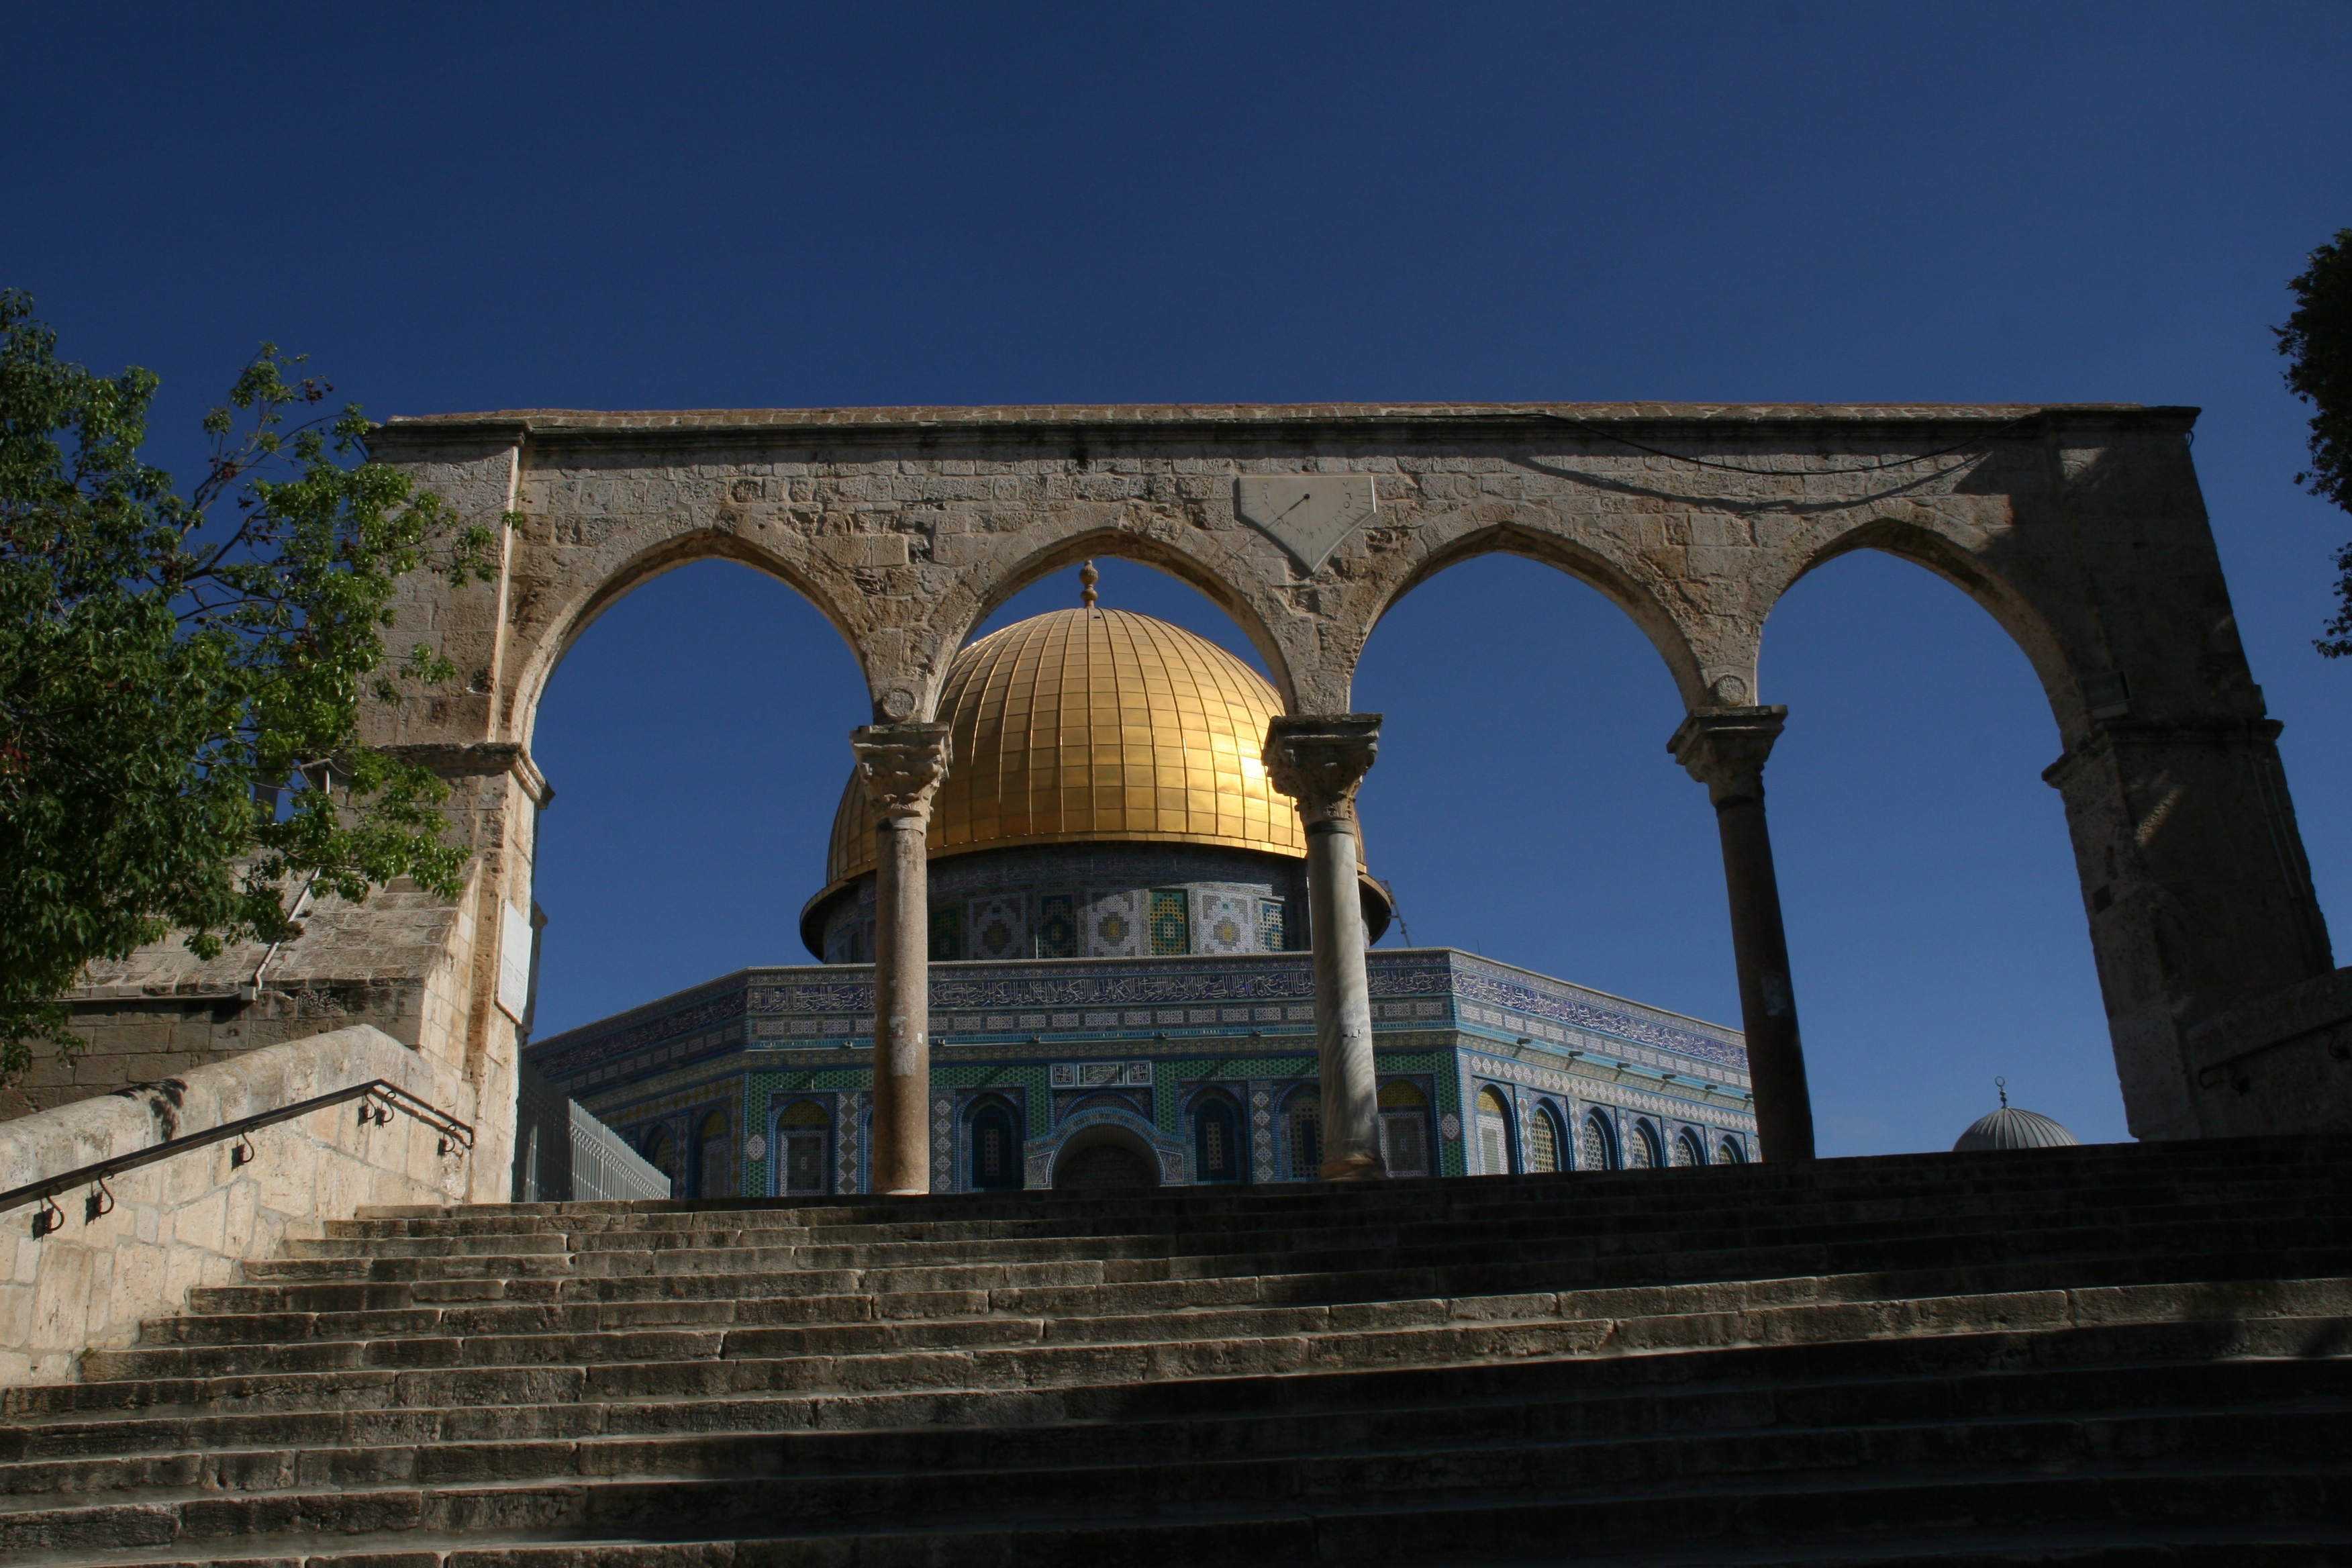 Displacement, swimming and resistance: Vignettes from Jerusalem at 50 years of occupation